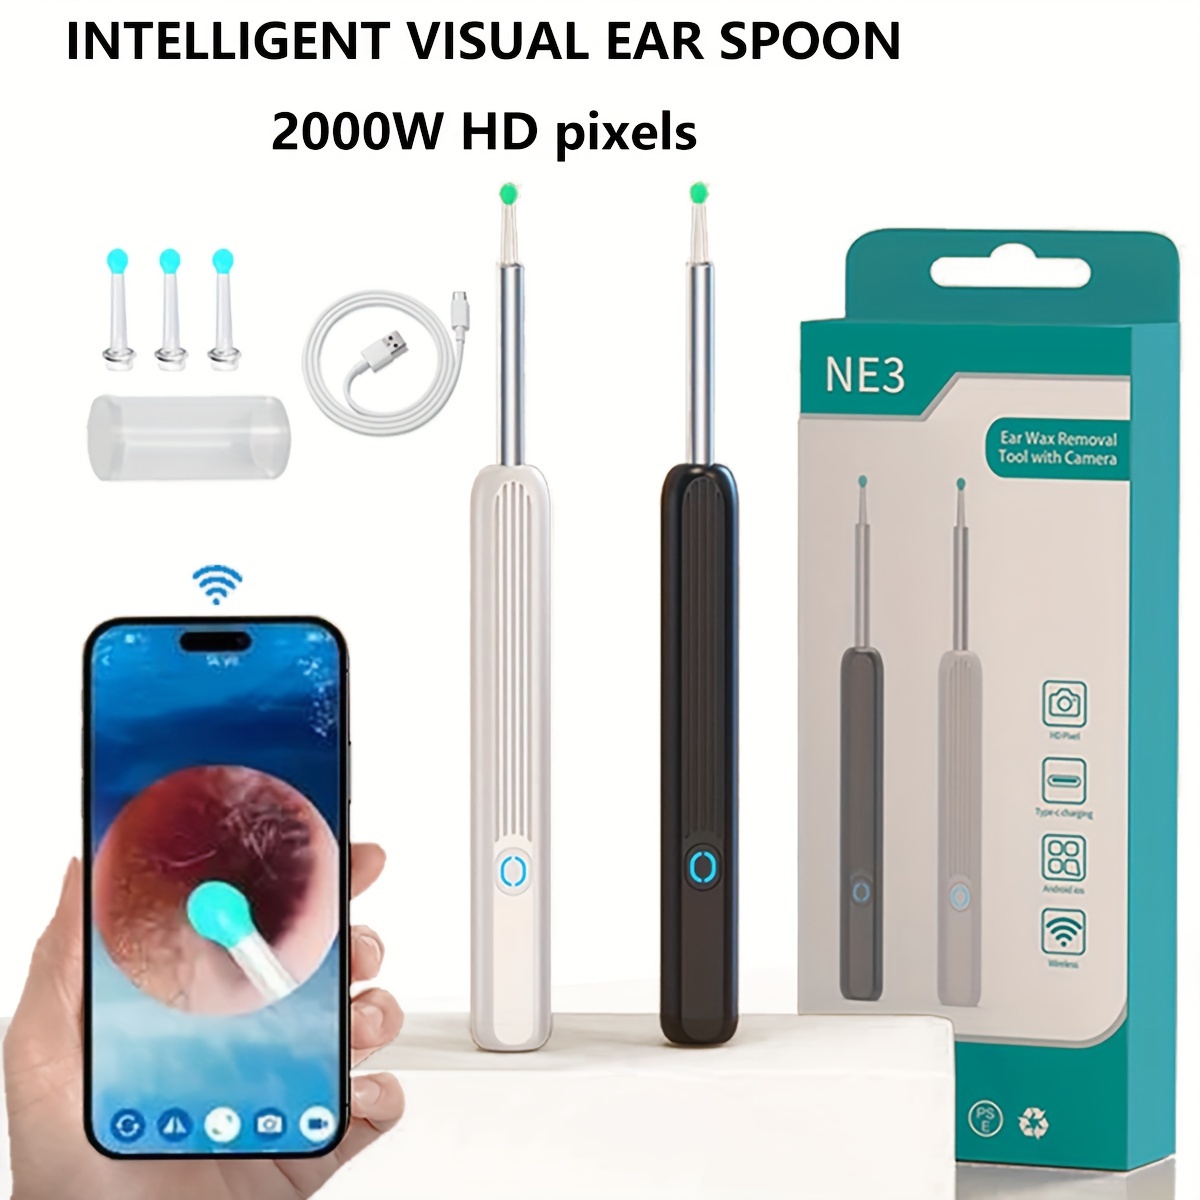 1 Set Of Home Smart Visual Ear Scoop With Camera, Wifi Video Ear